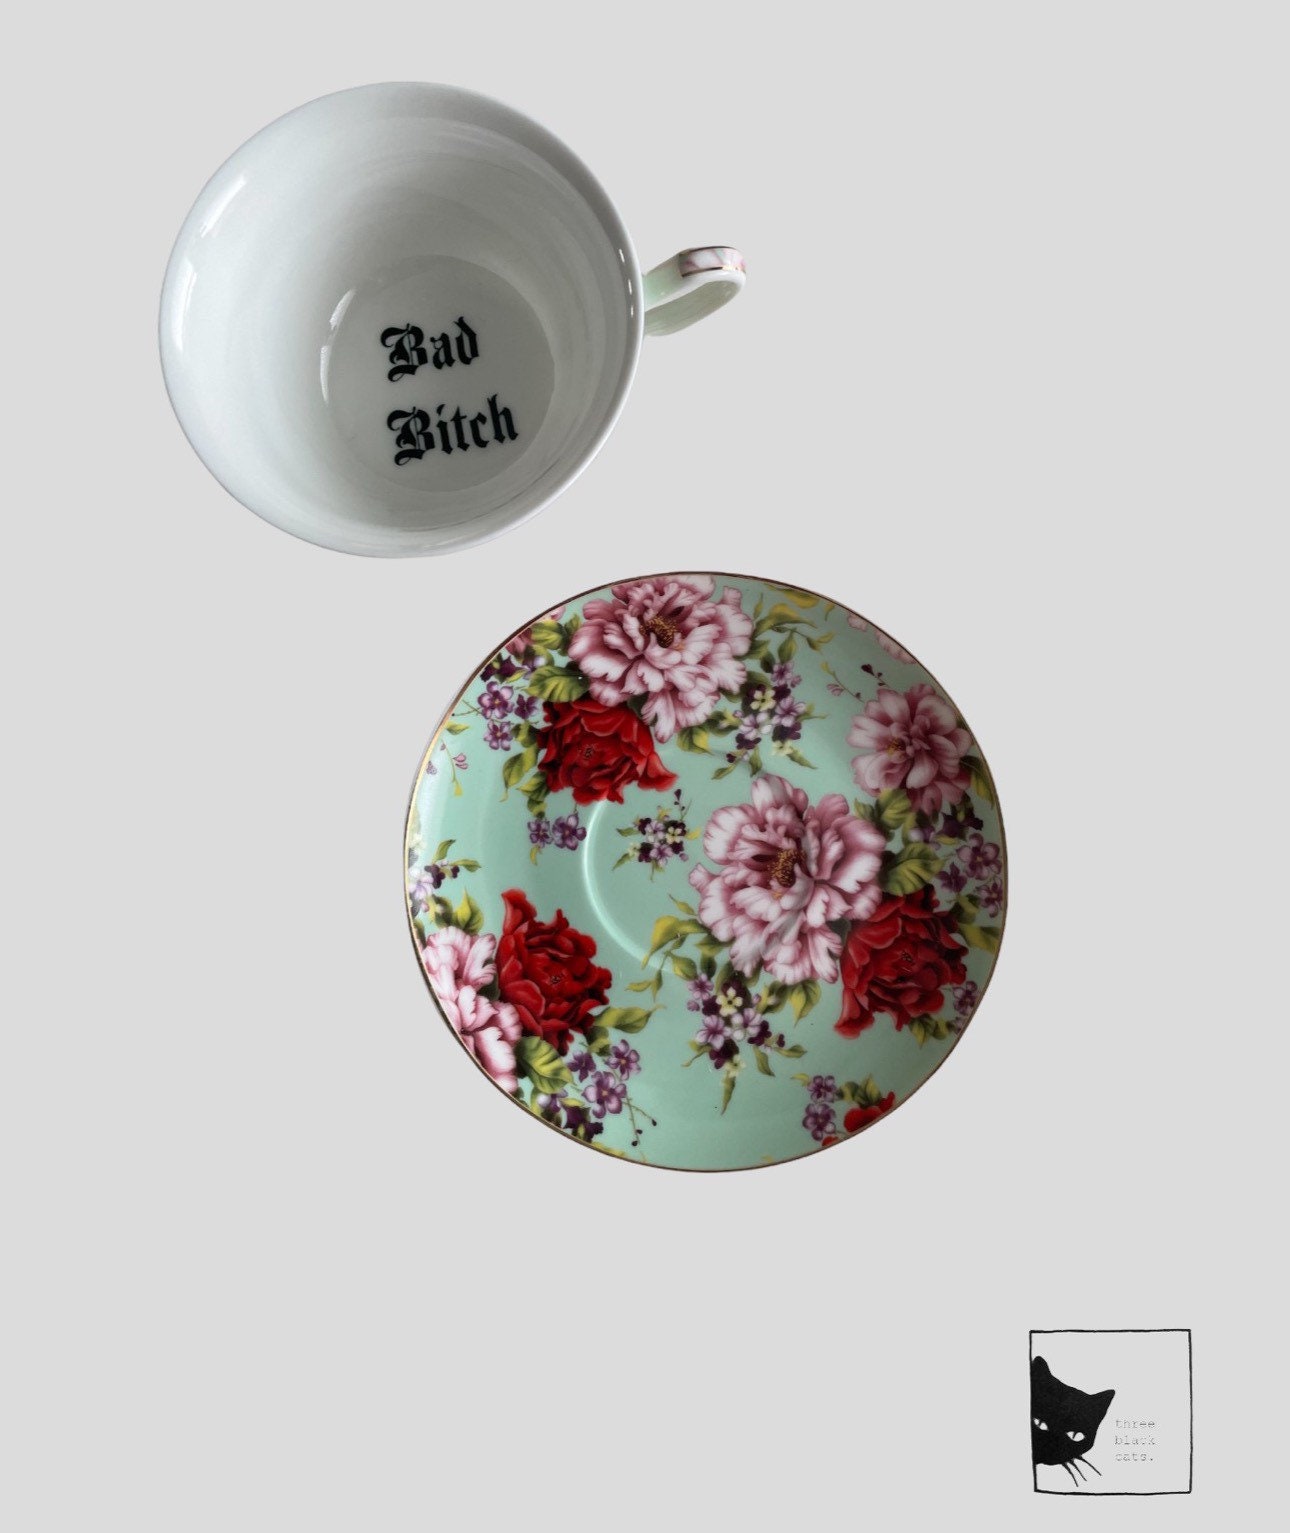 Bad bitch, Tea cup and saucer, Green Floral